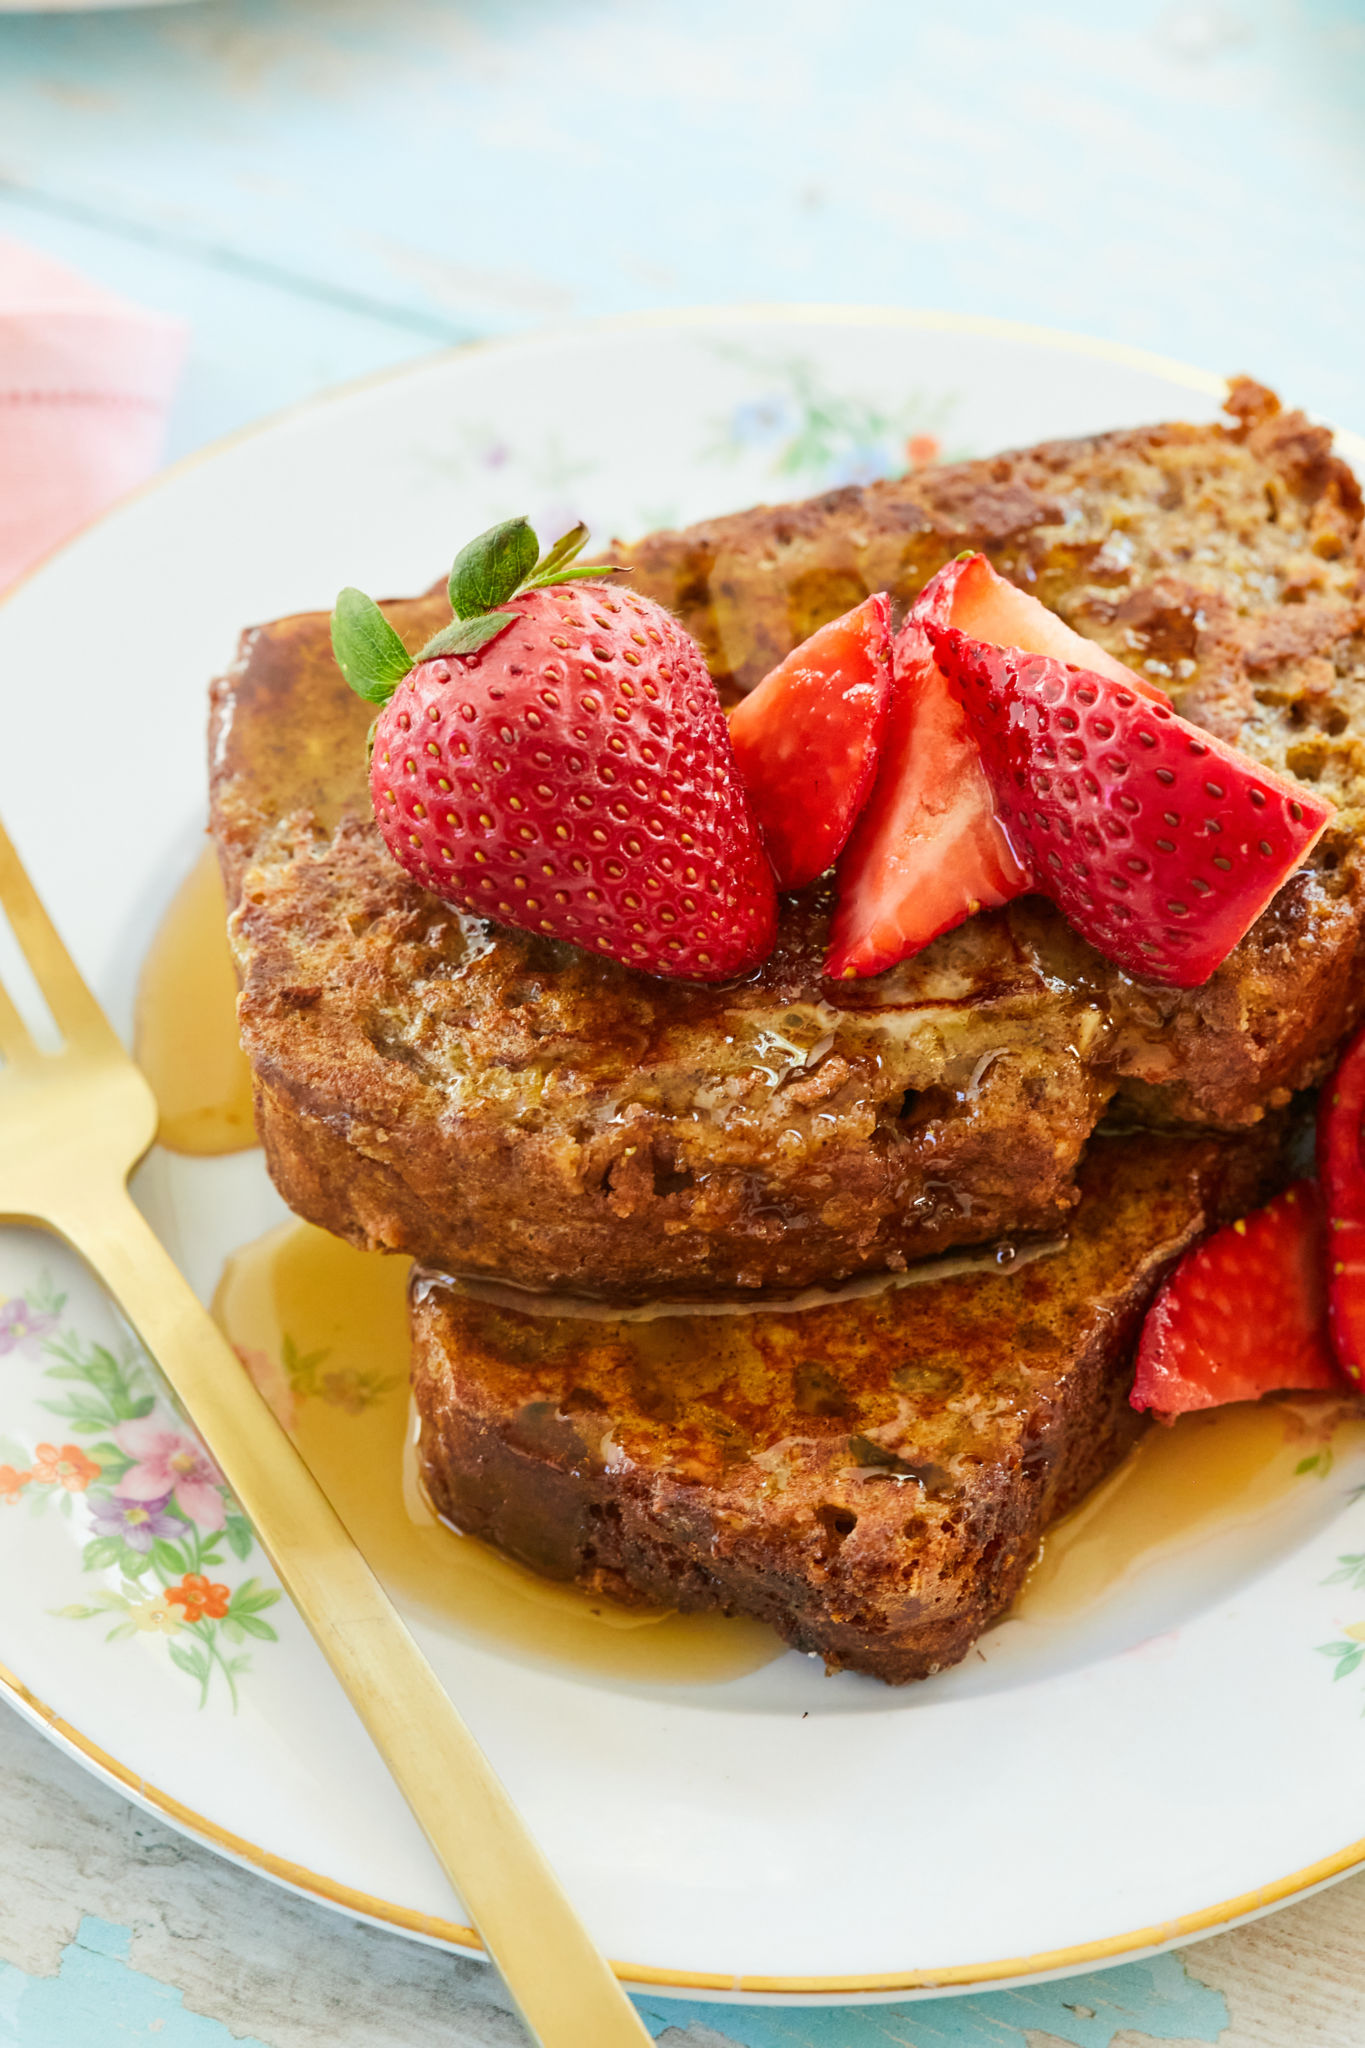 A close up of my French toast recipe made with banana bread.